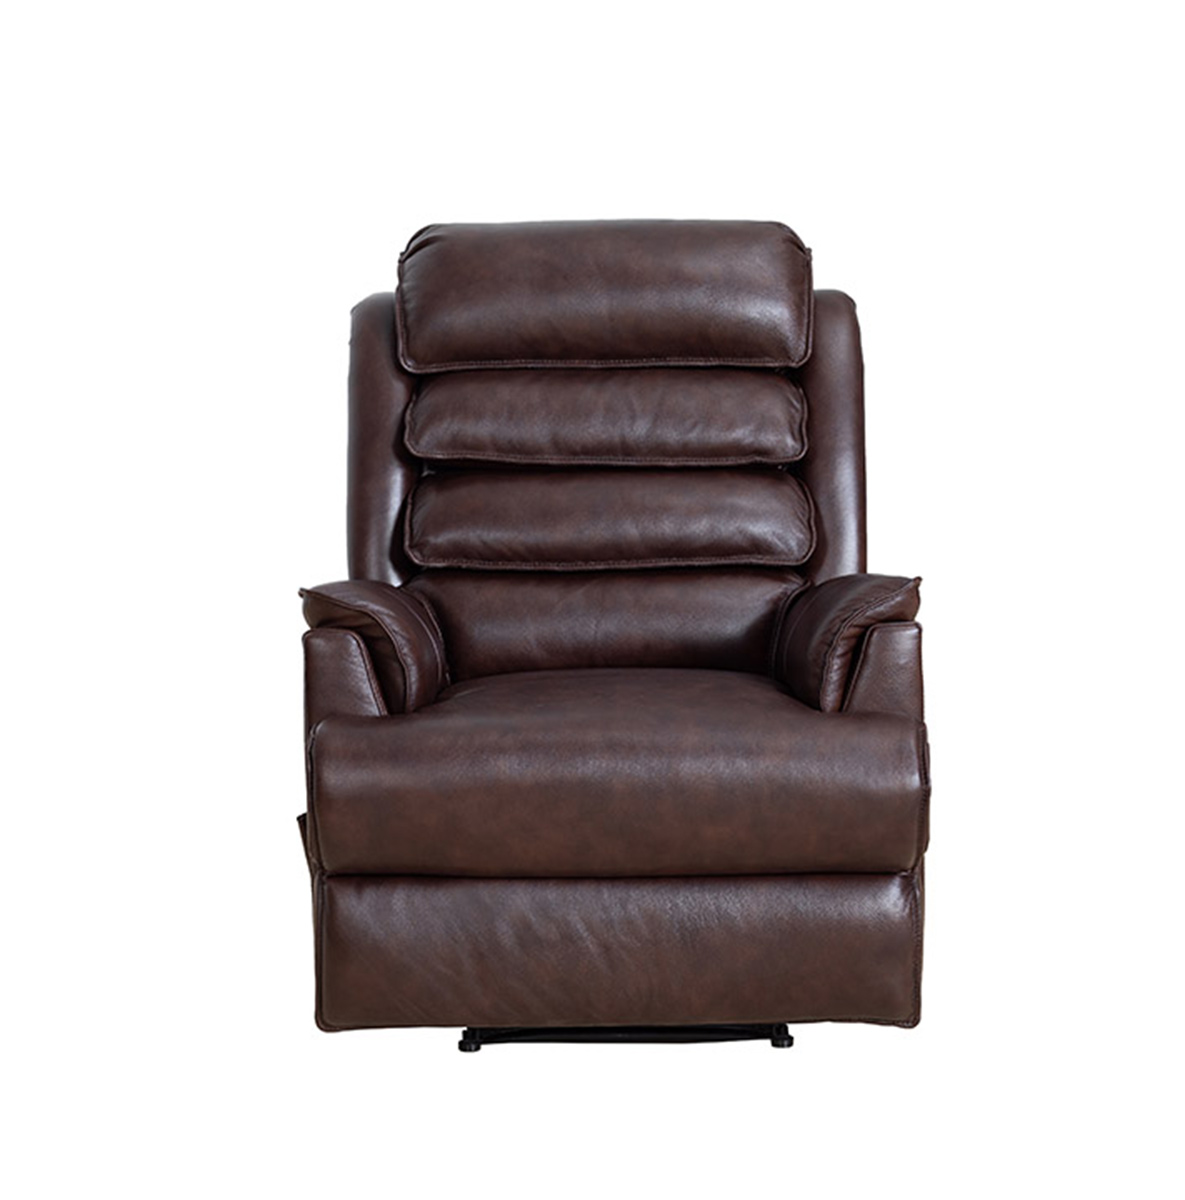 Barcalounger Gatlin Big and Tall Recliner Chair - Ryegate Brownstone/Leather Match